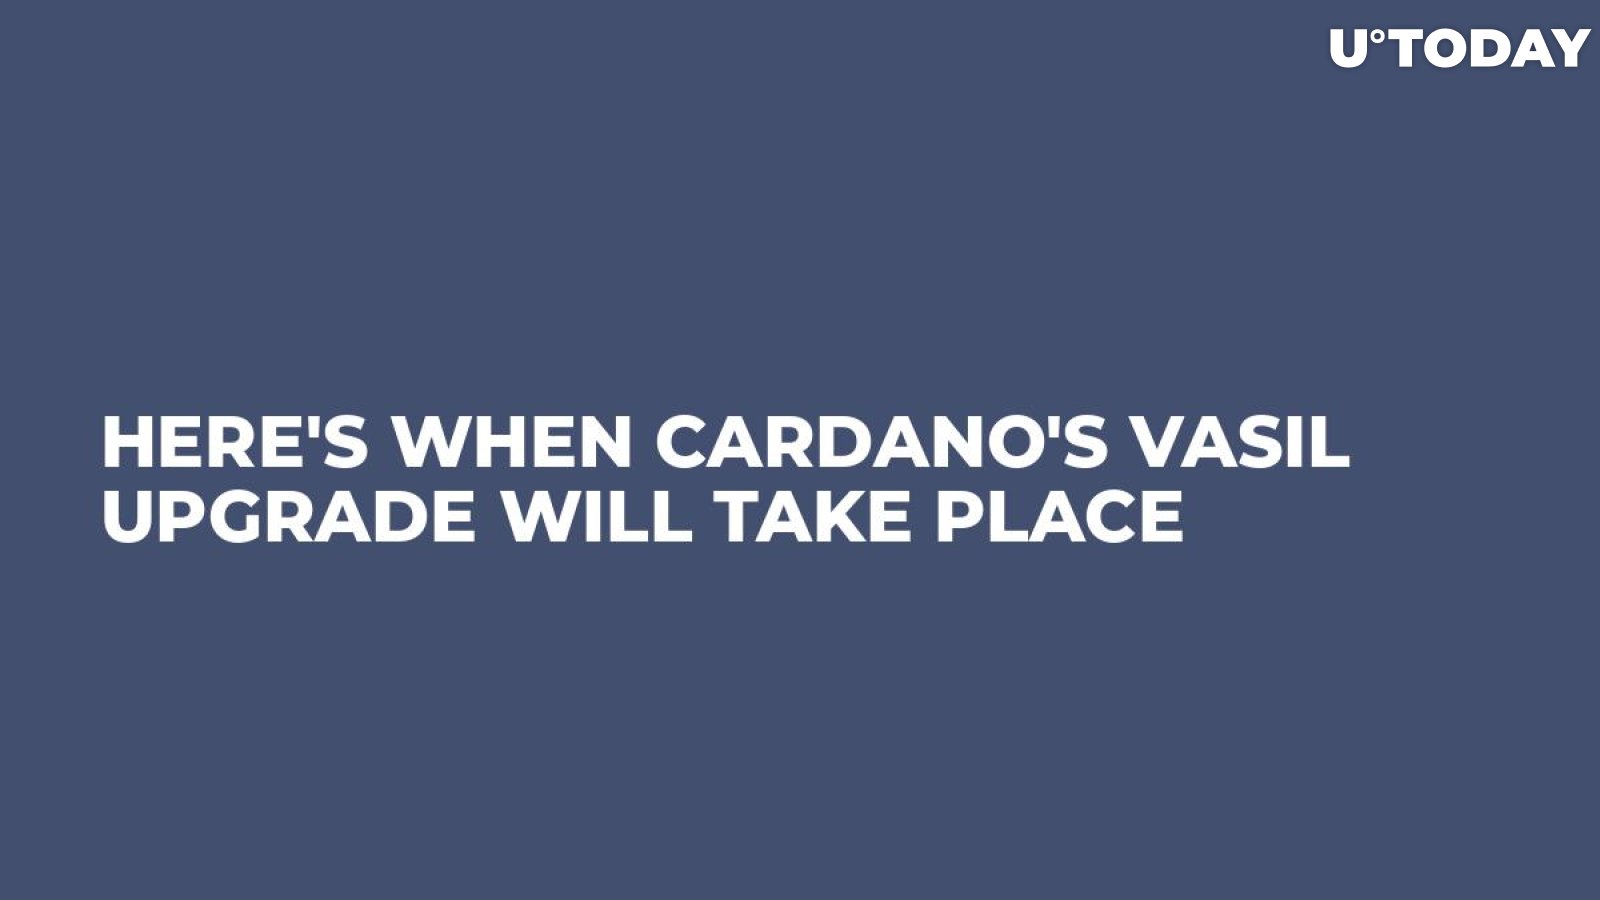 Here's When Cardano's Vasil Upgrade Will Take Place